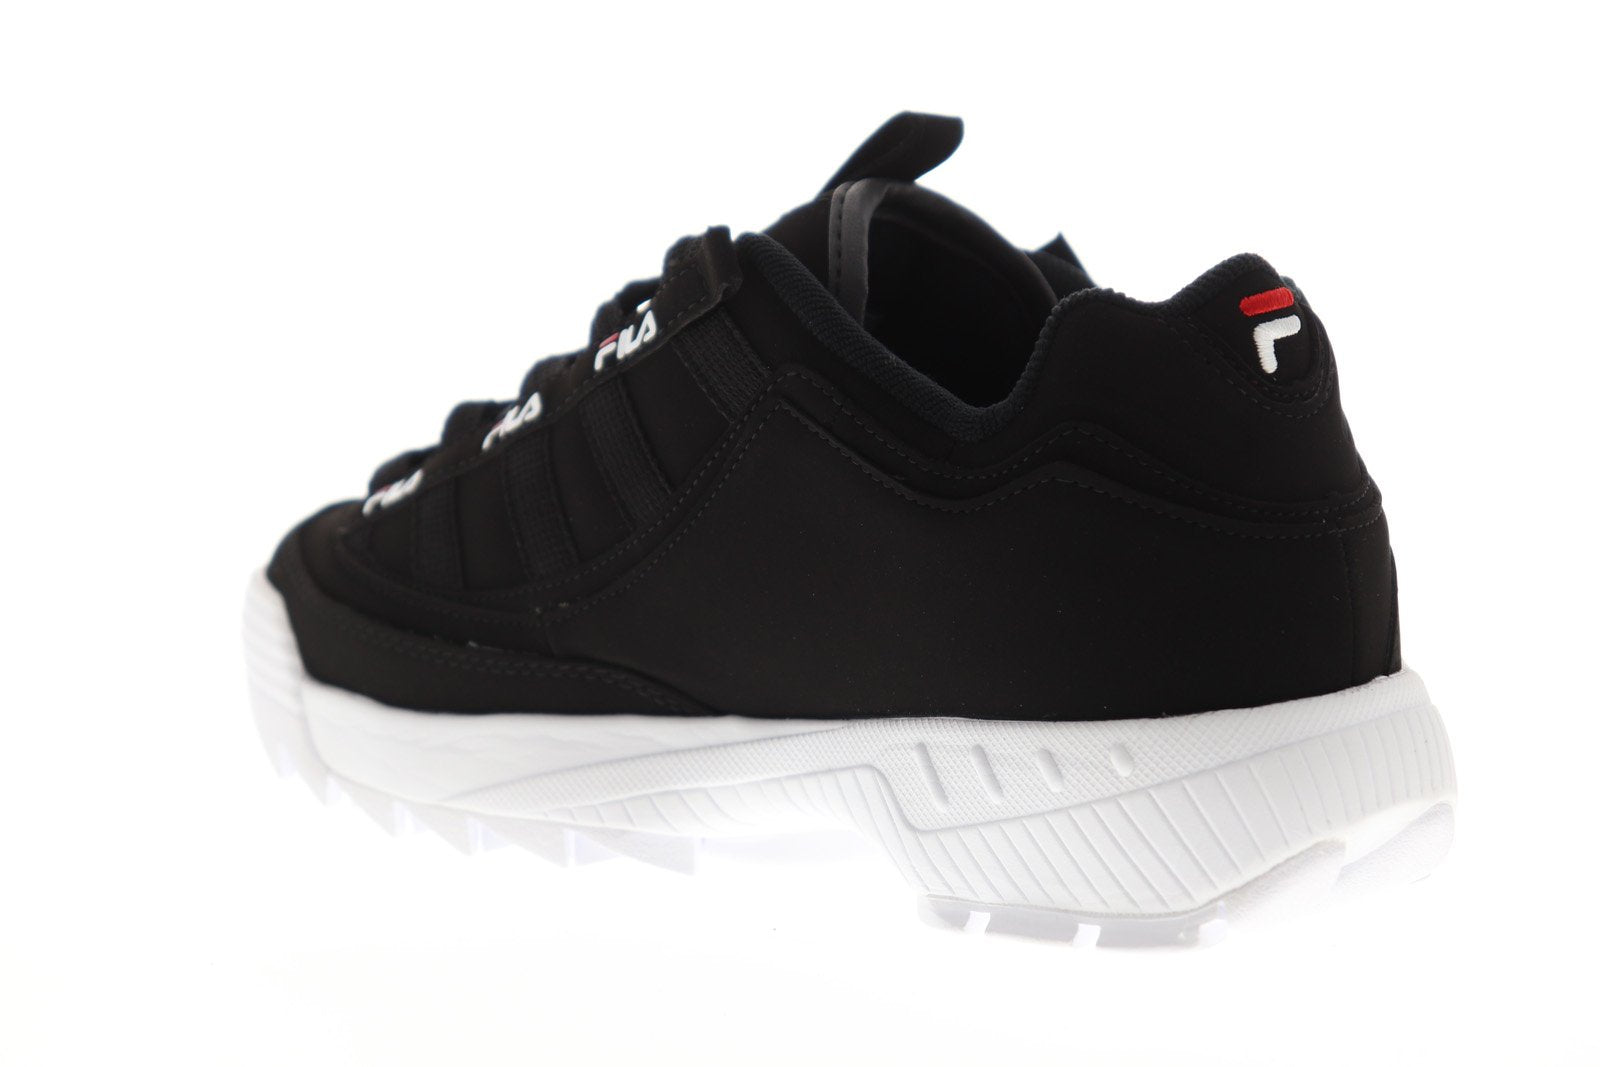 Woning Viool bespotten Fila D-Formation 1CM00490-014 Mens Black Casual Low Top Lifestyle Snea -  Ruze Shoes